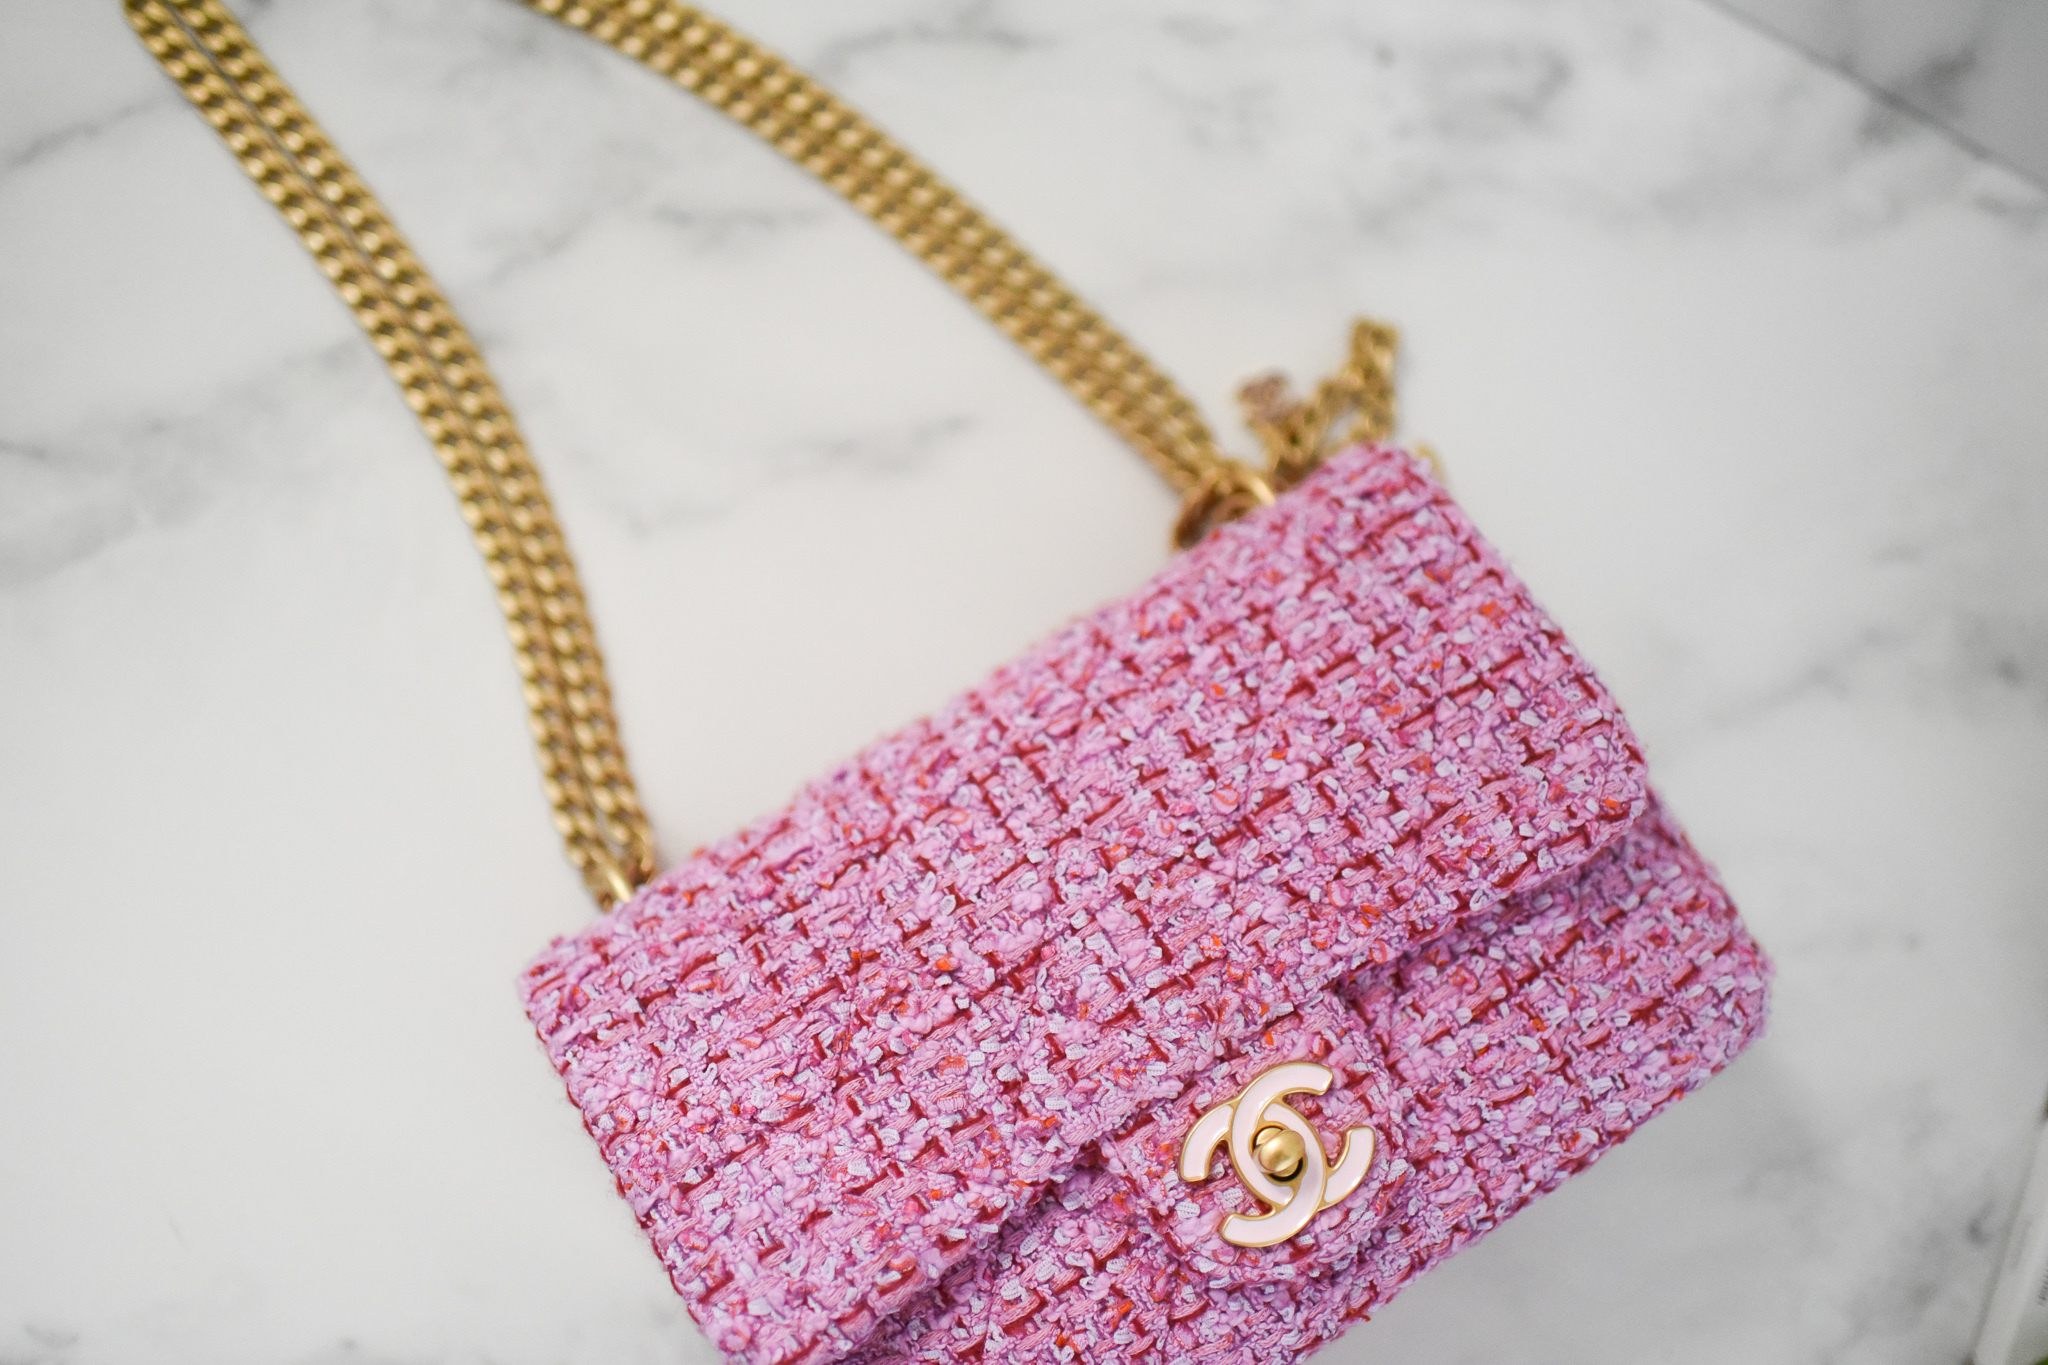 Chanel Tweed Flap Bag, Pink Tweed with Gold Hardware, New in Box WA001